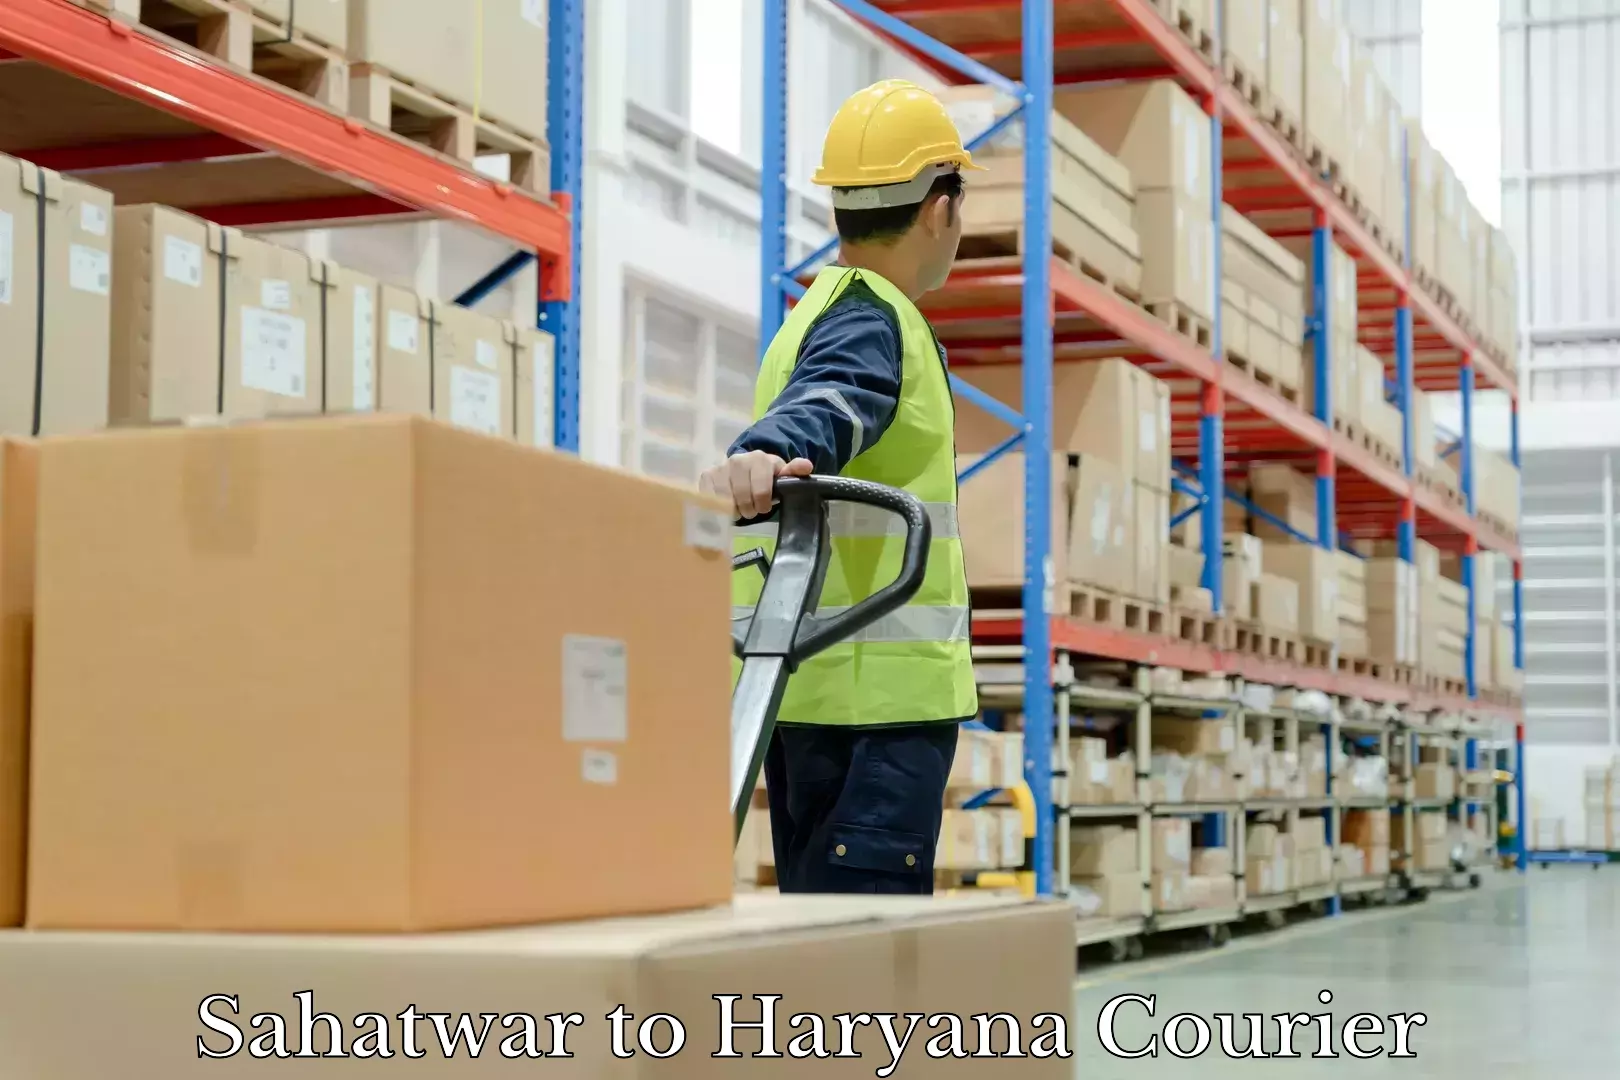 Luggage shipping specialists Sahatwar to NCR Haryana